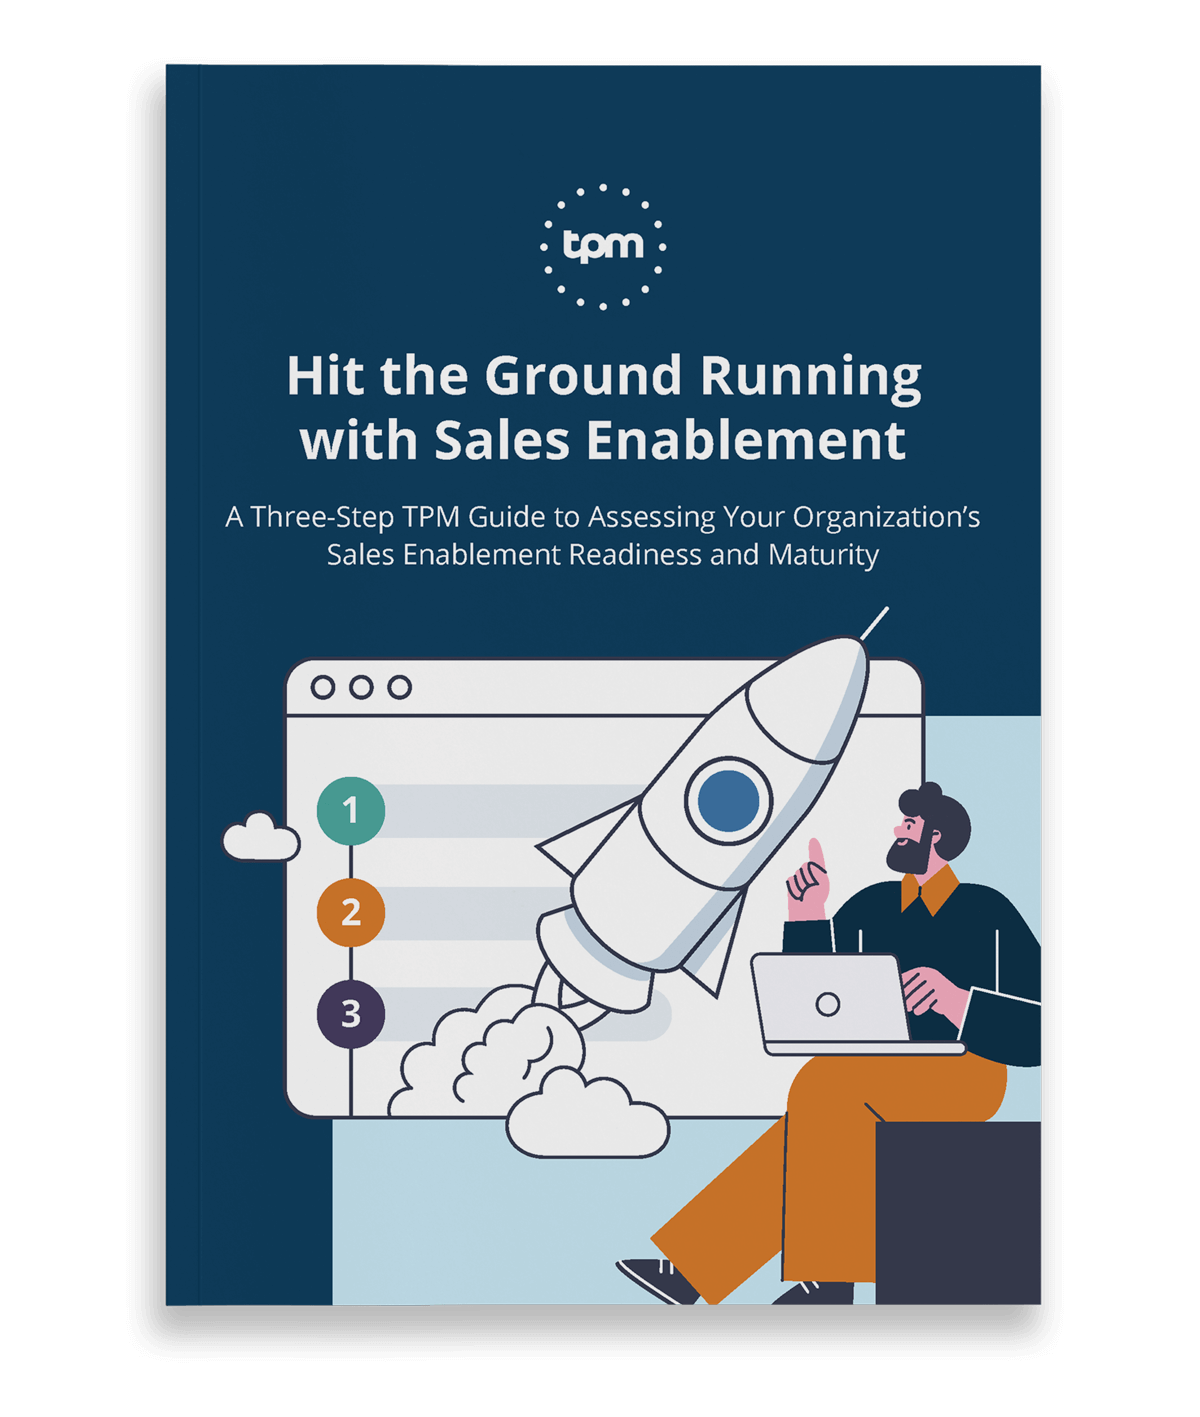 
Hit the Ground Running with Sales Enablement